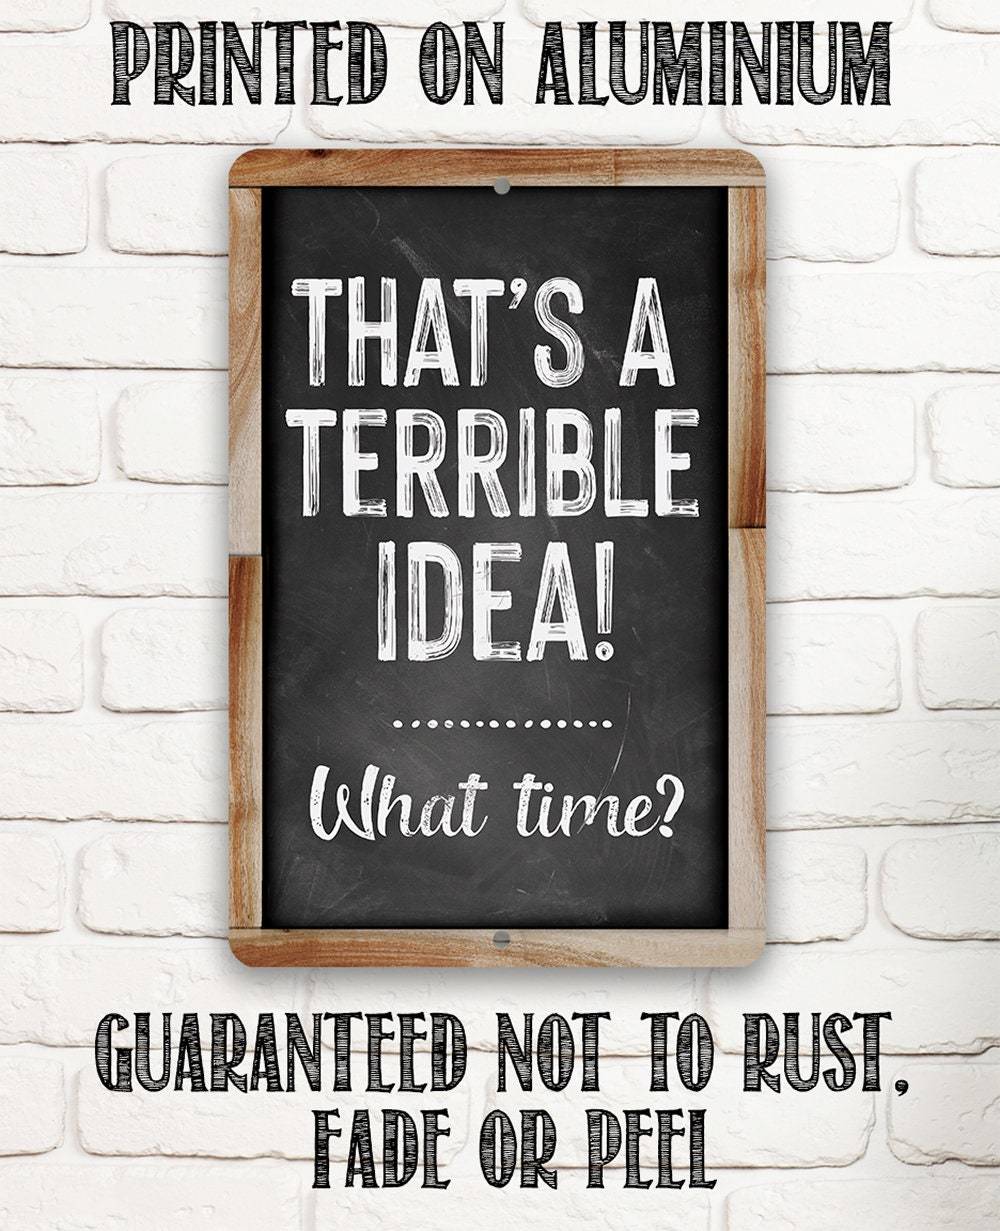 That's A Terrible Idea! What Time? - Metal Sign | Lone Star Art.